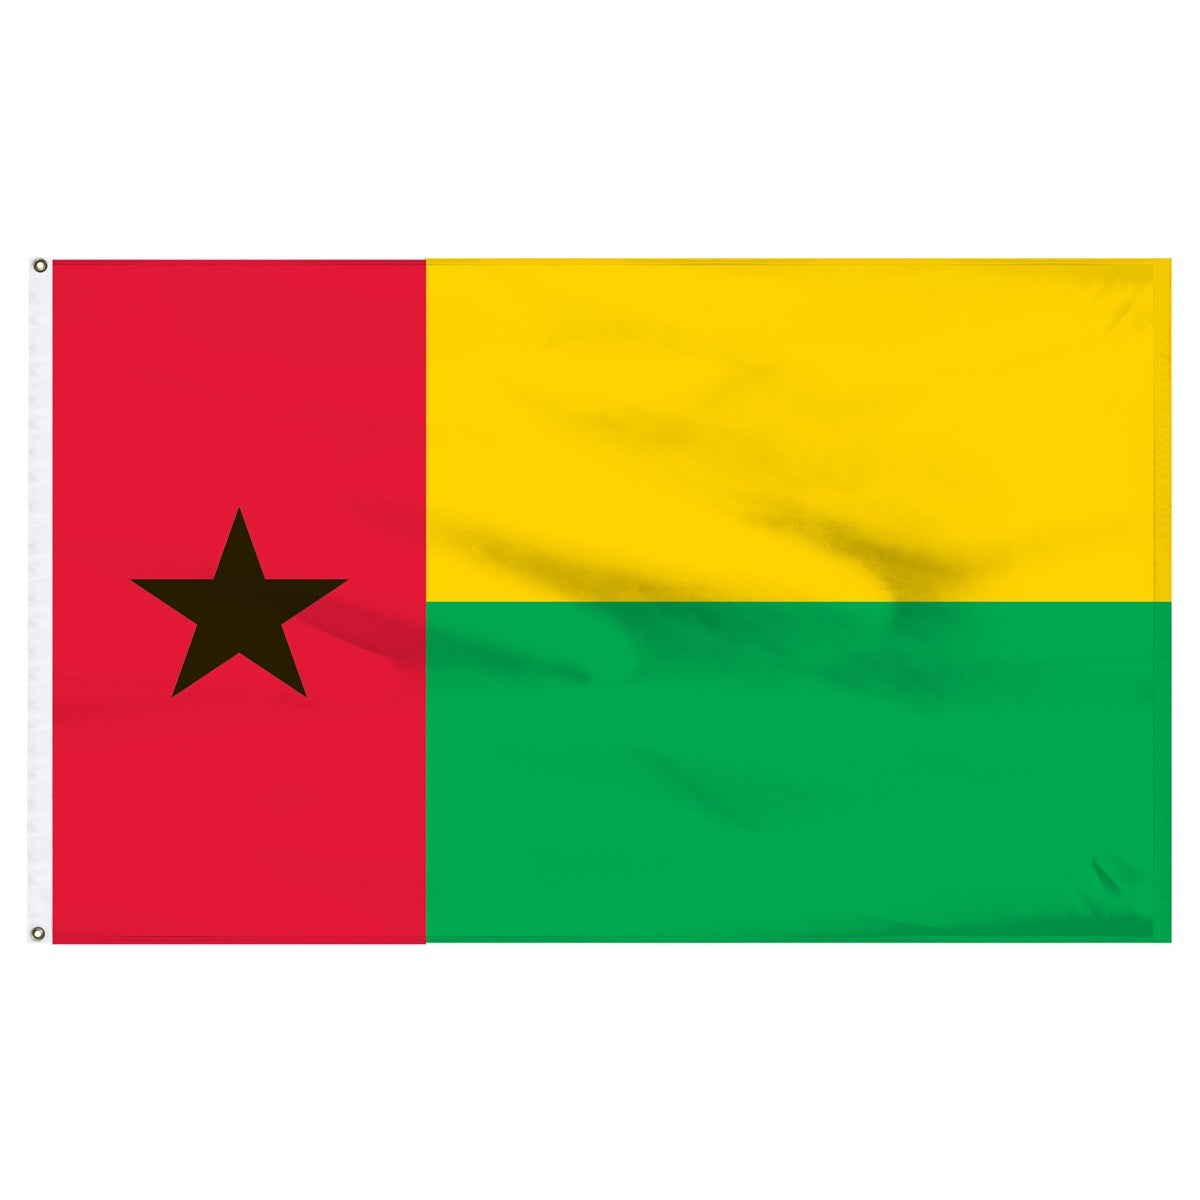 guinea bissau flags for sale 1-800 flags